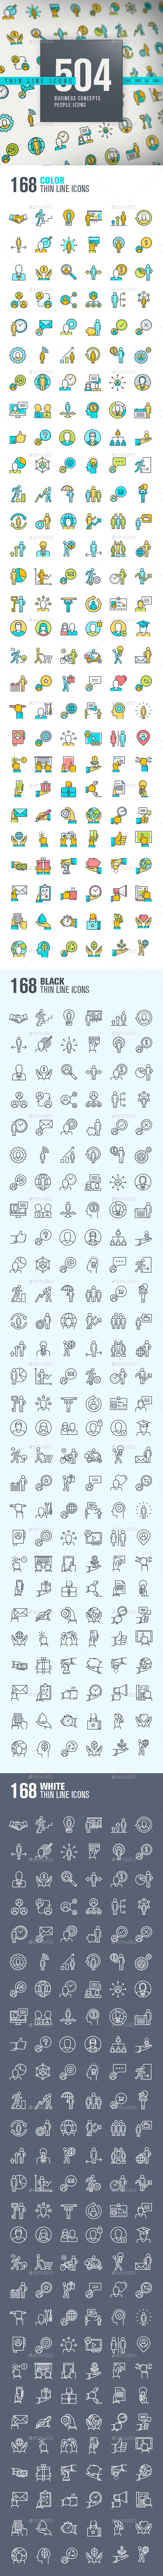 Thin Line People Icons